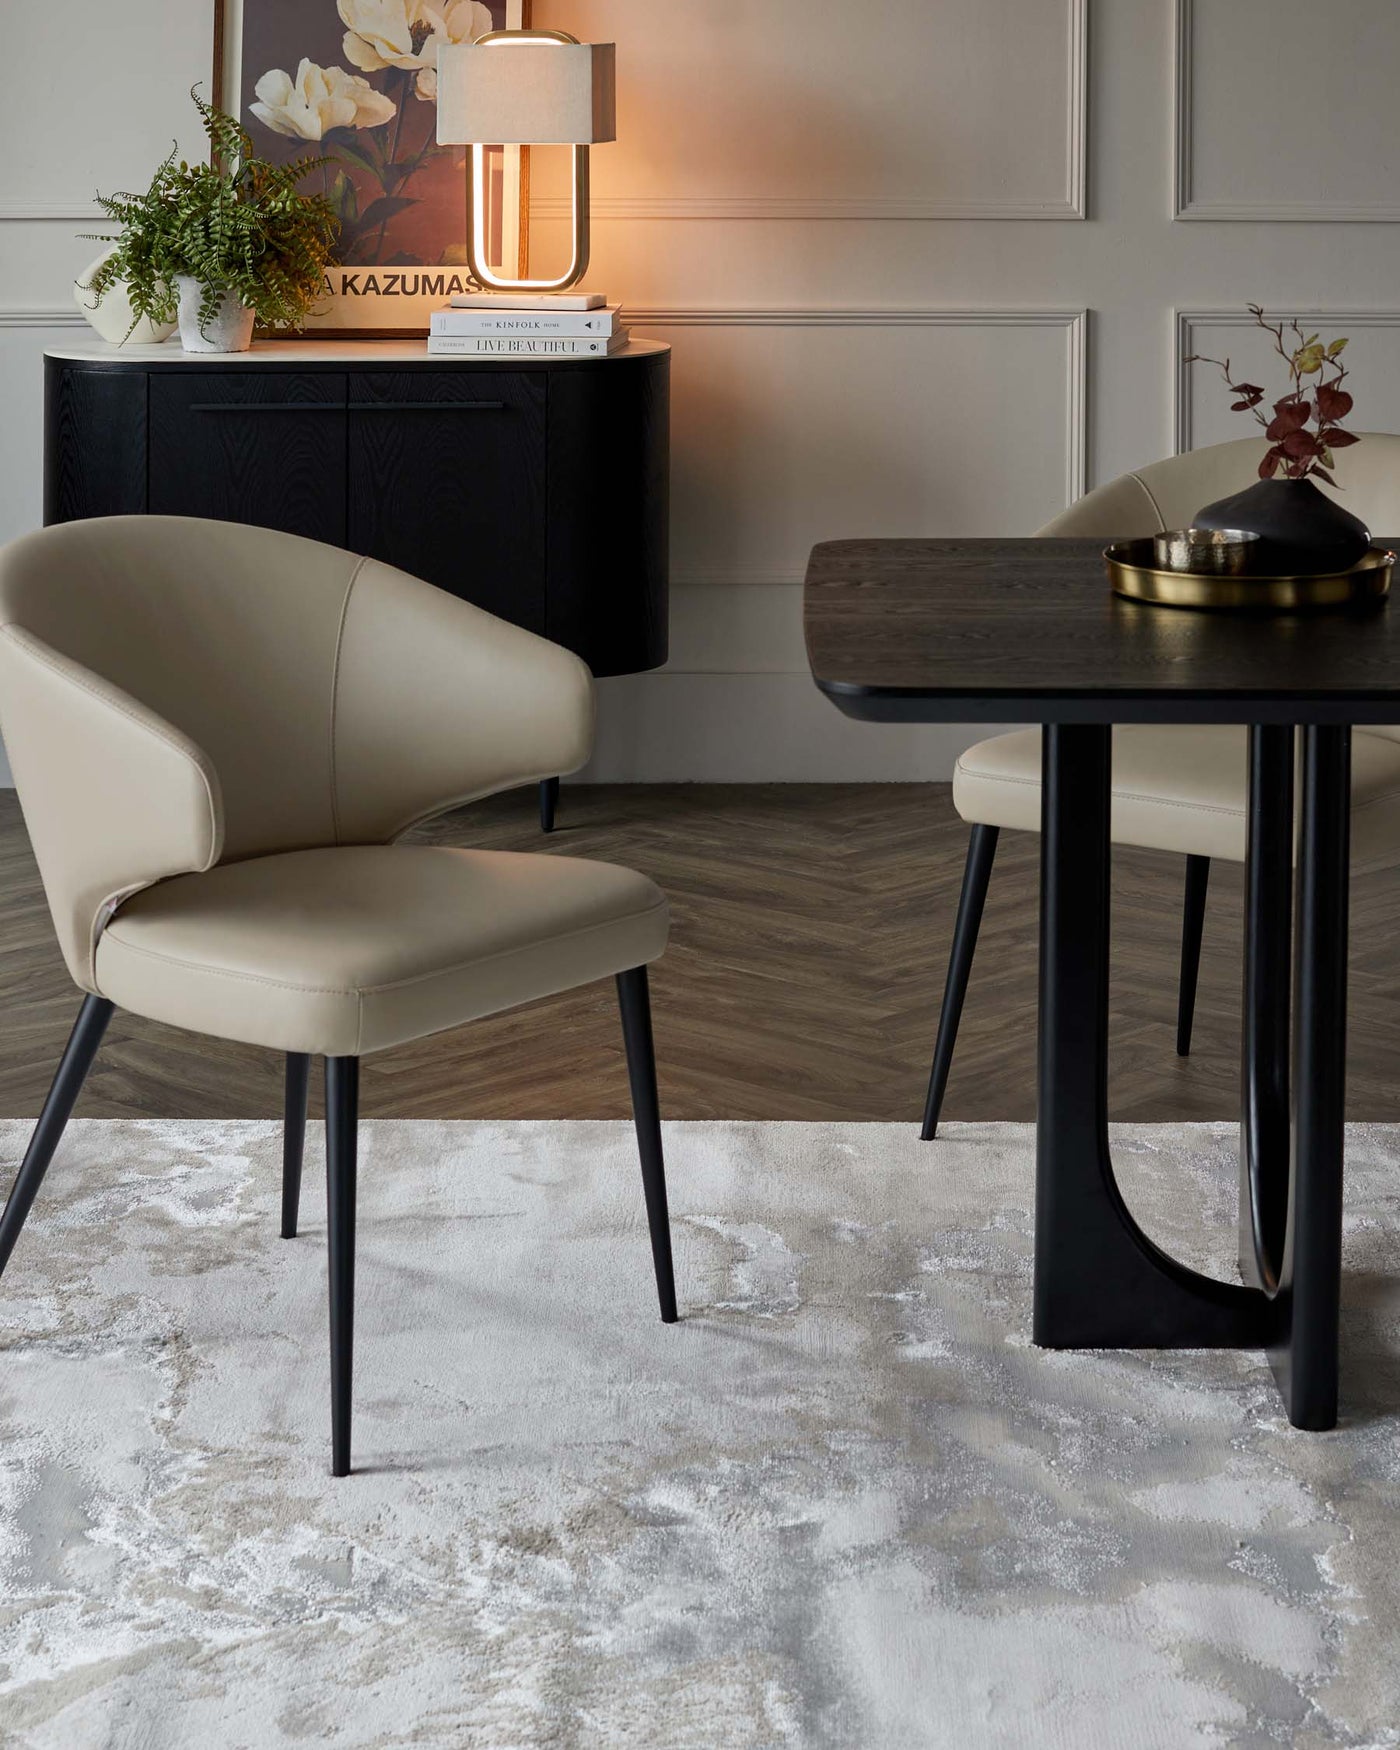 Elegant interior with a beige upholstered dining chair with black metal legs, a black round dining table with a unique central leg design, and a black textured sideboard under a contemporary wall-mounted lamp. A decorative area rug with a muted abstract pattern enhances the floor space.